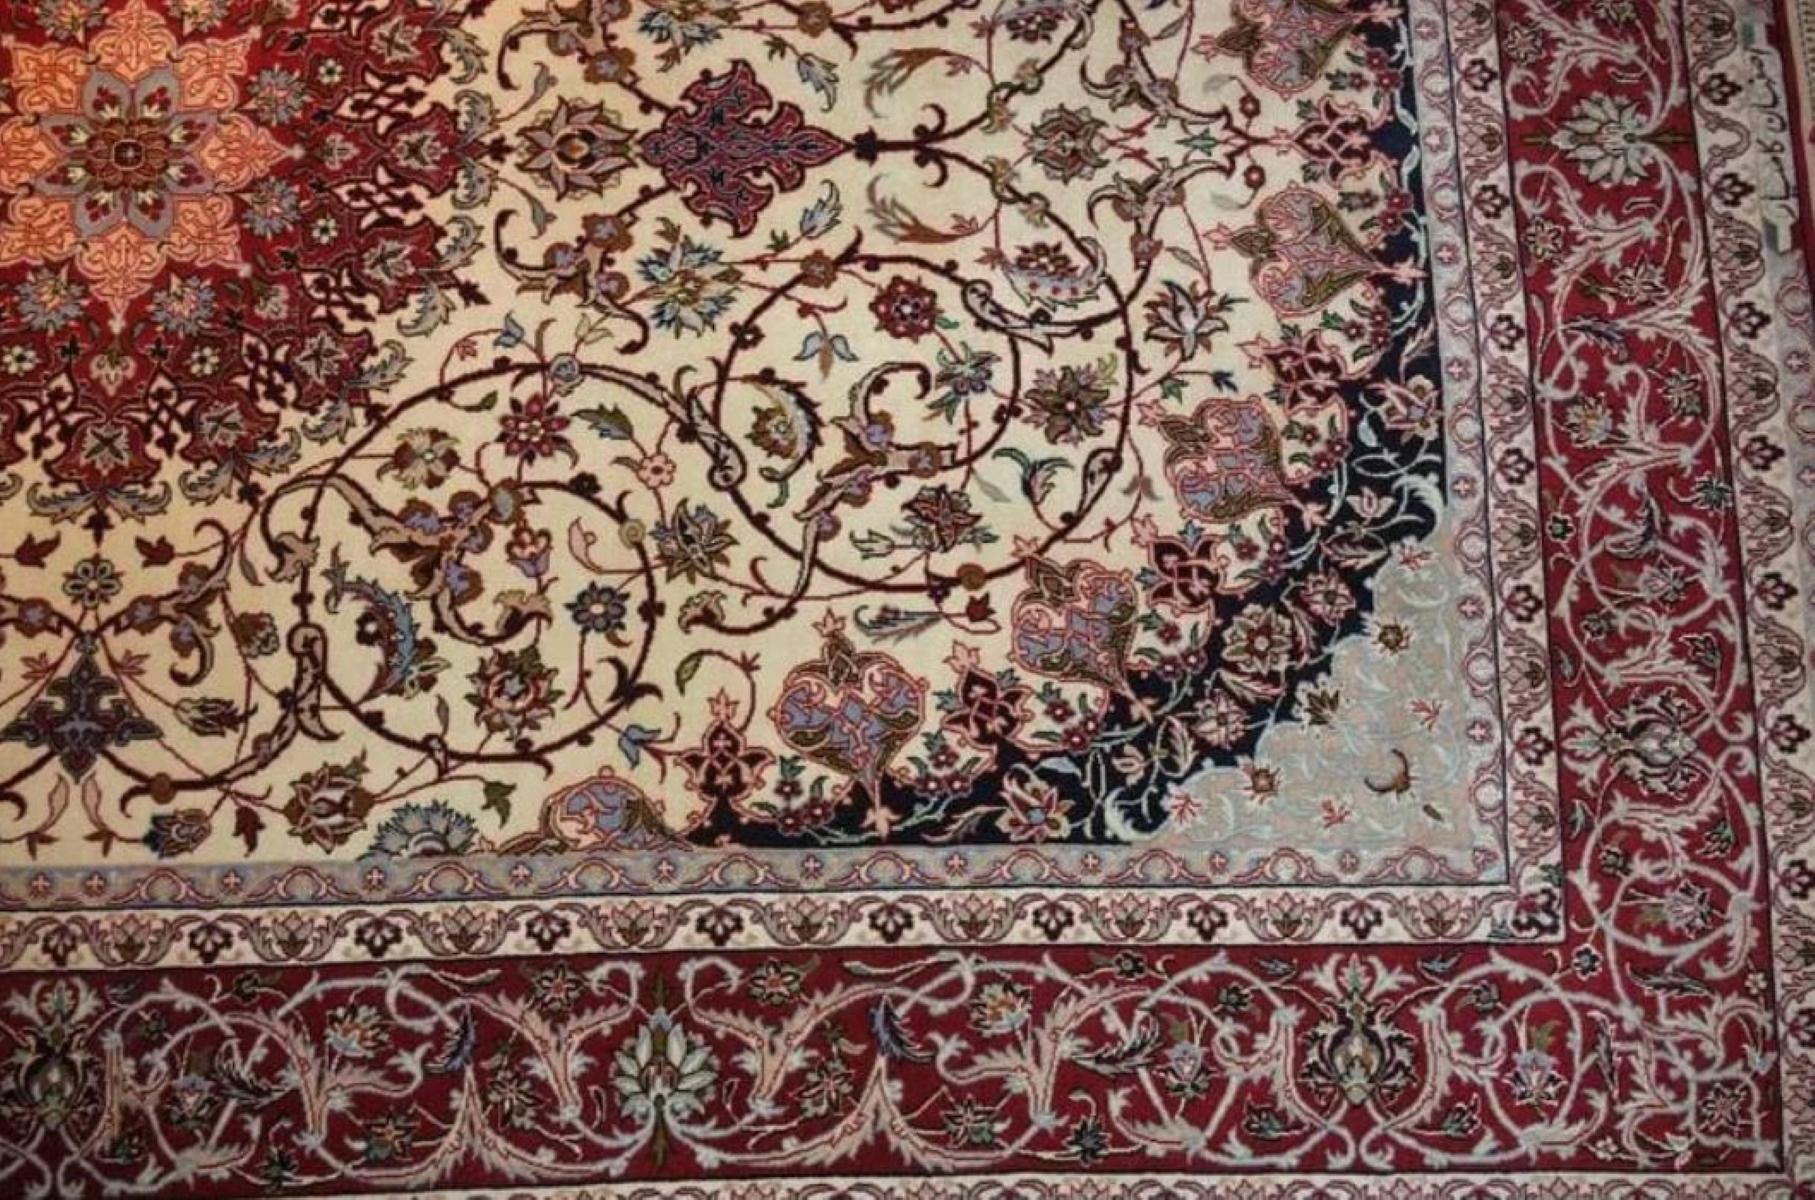 Very fine Persian Rug Qum 600 Knots per inch, Size 7.8 x 5.2 Iran Isfahan Kamiar Silk and Silk foundation. Around 3,400,000 knots tied by hand one by one. It takes 3 years to complete this piece of art.